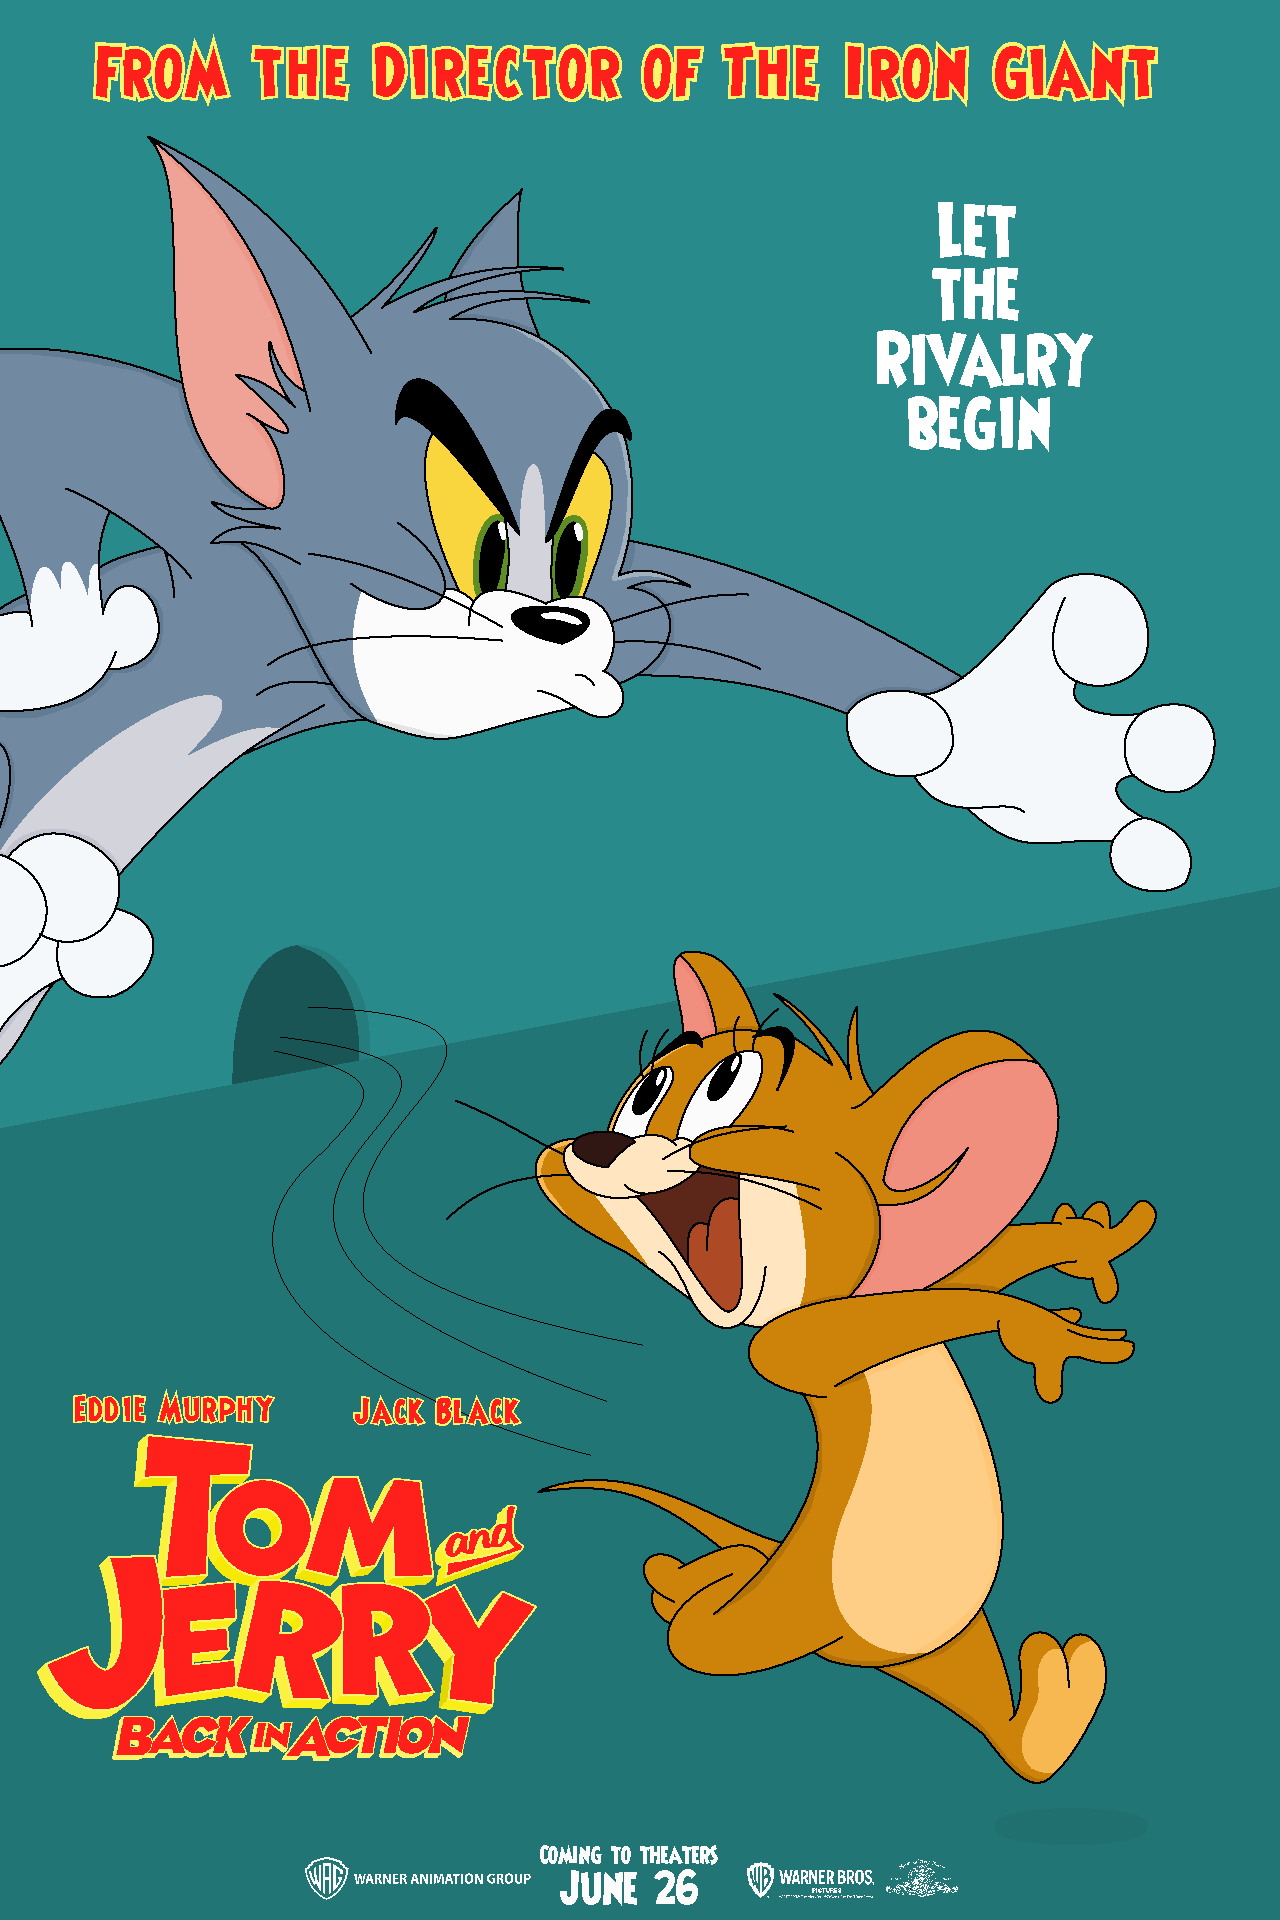 Tom and Jerry: Back in Action - Theatrical Poster by ABFan21 on DeviantArt